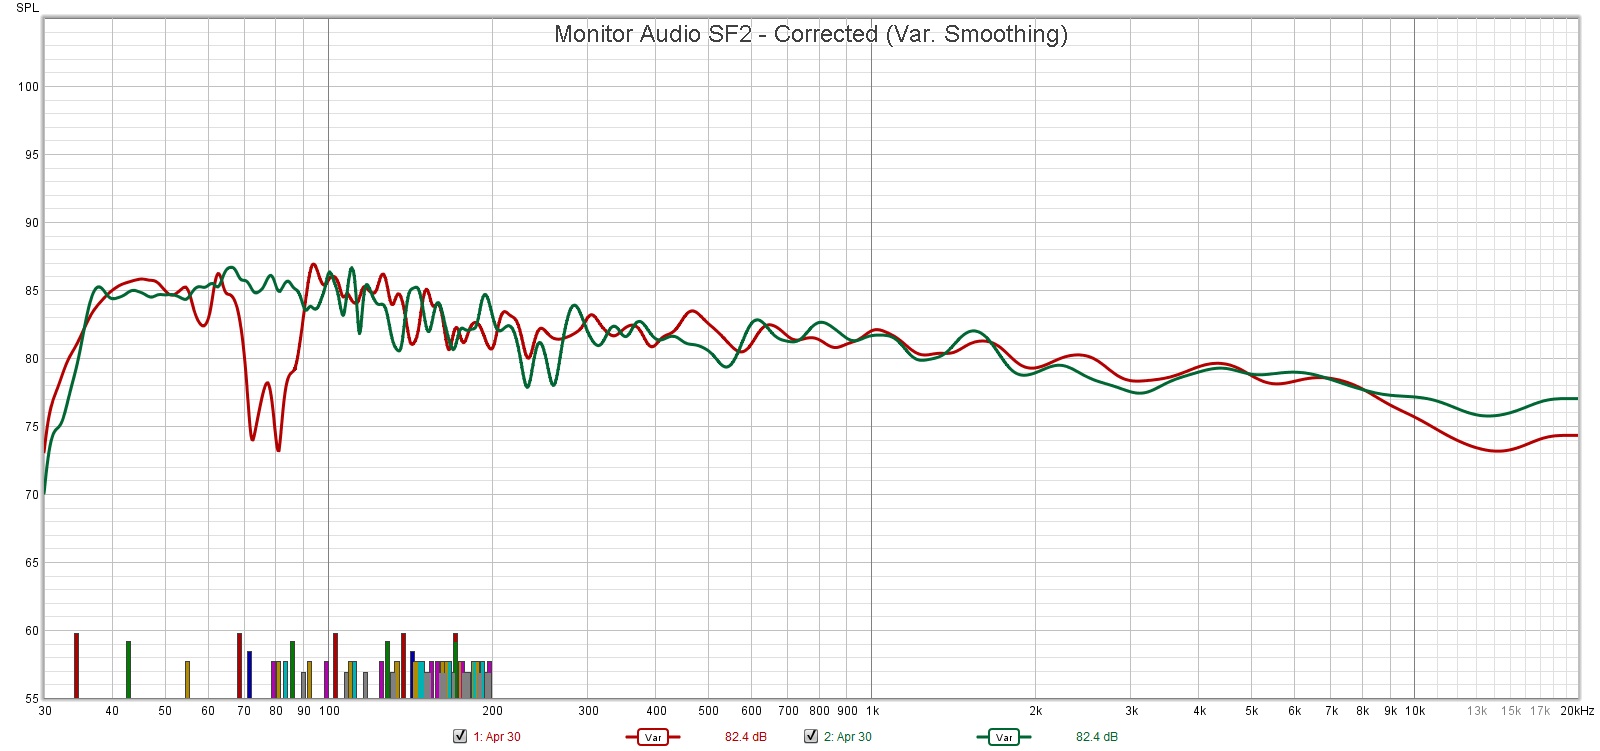 Monitor Audio SF2 (After Correction Var smoothing).jpg